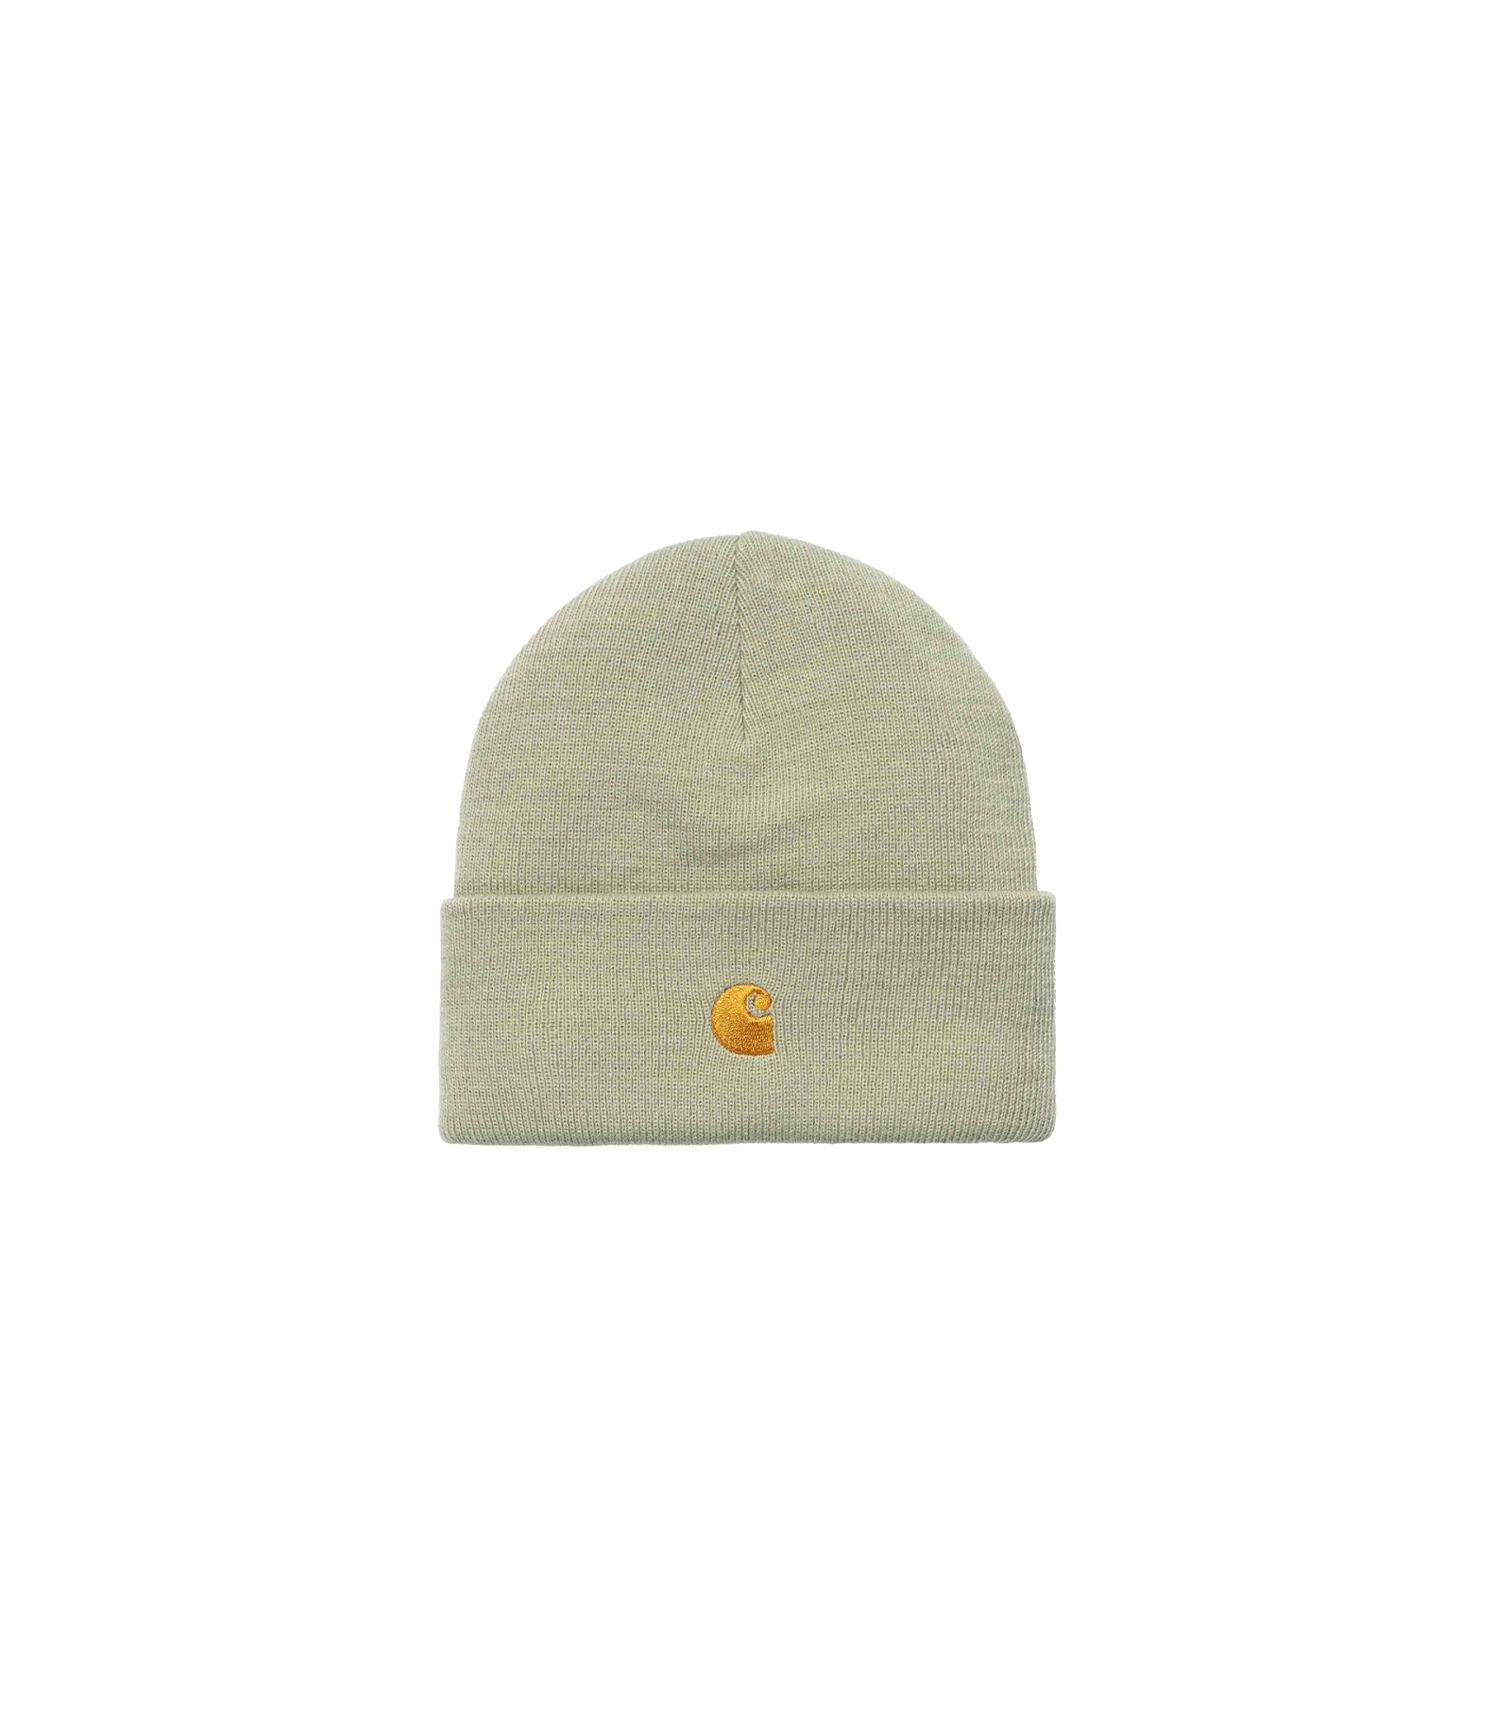 Chase Beanie - Agave / Gold